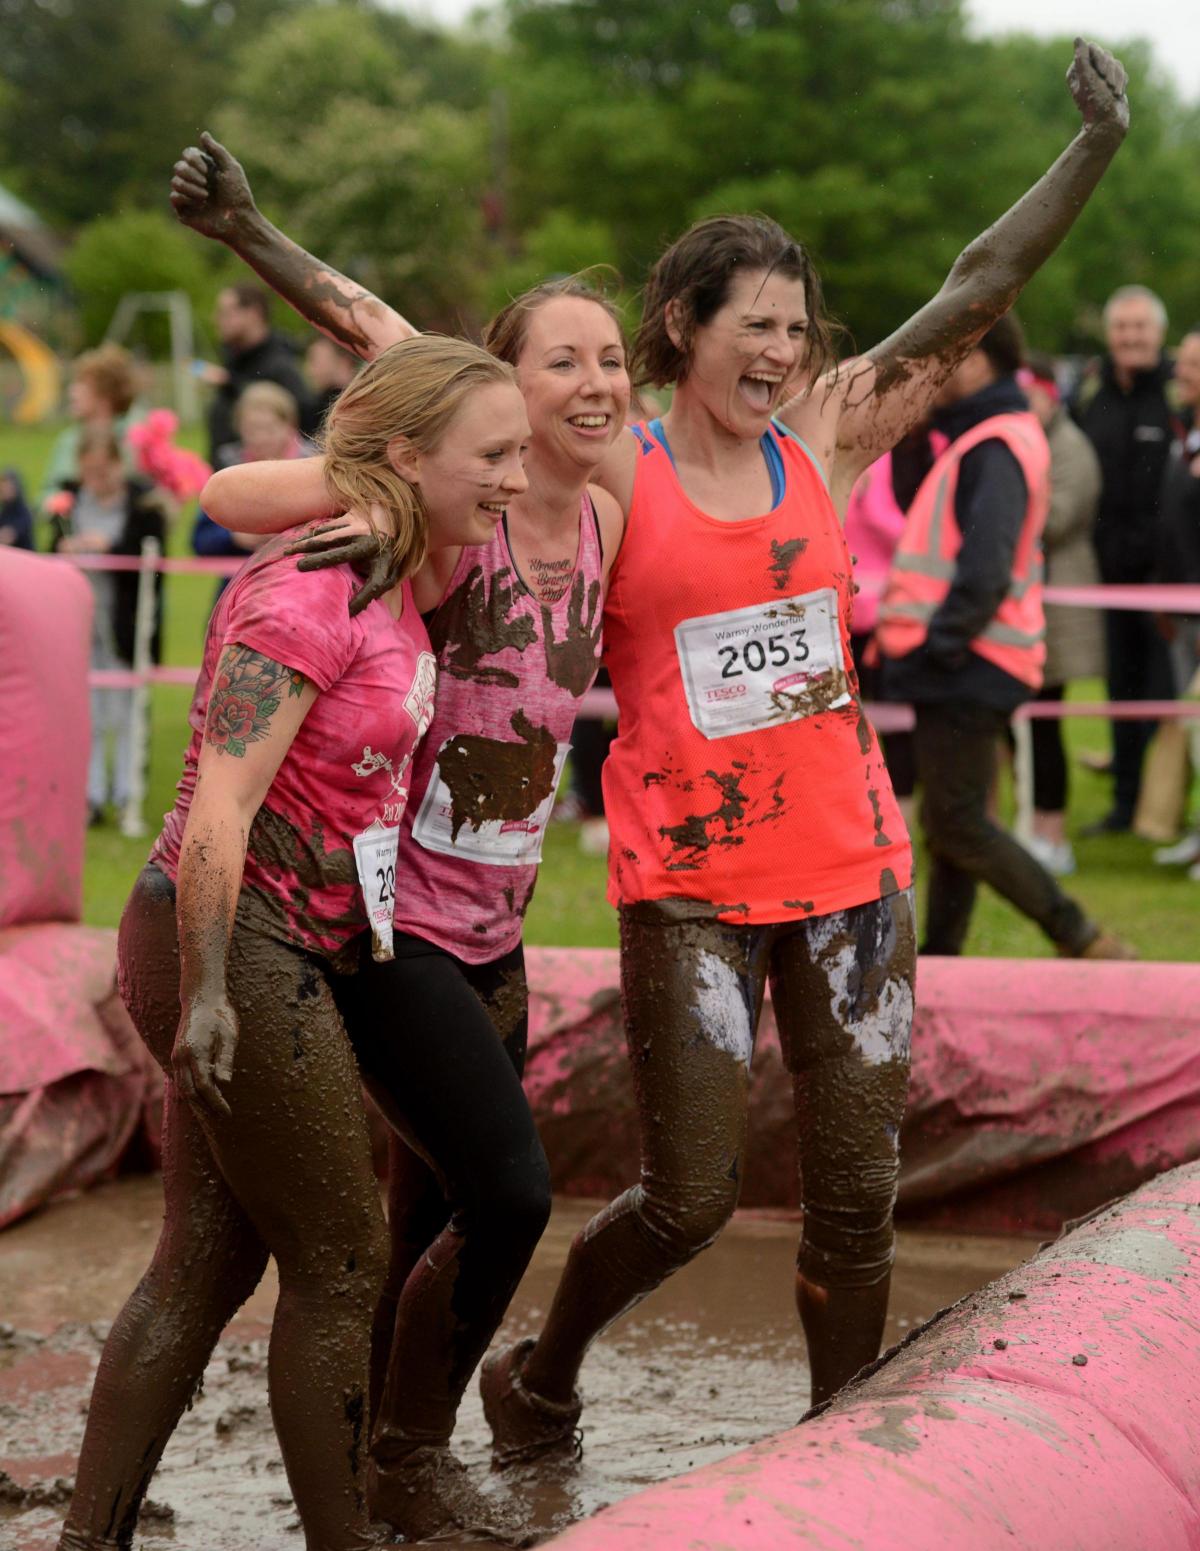 Tackling the dirt at Lydiard Park in the 5k Preddy Muddy event in aid of Cancer Research UK. Picture by Clare Green/www.claregreenphotography.com